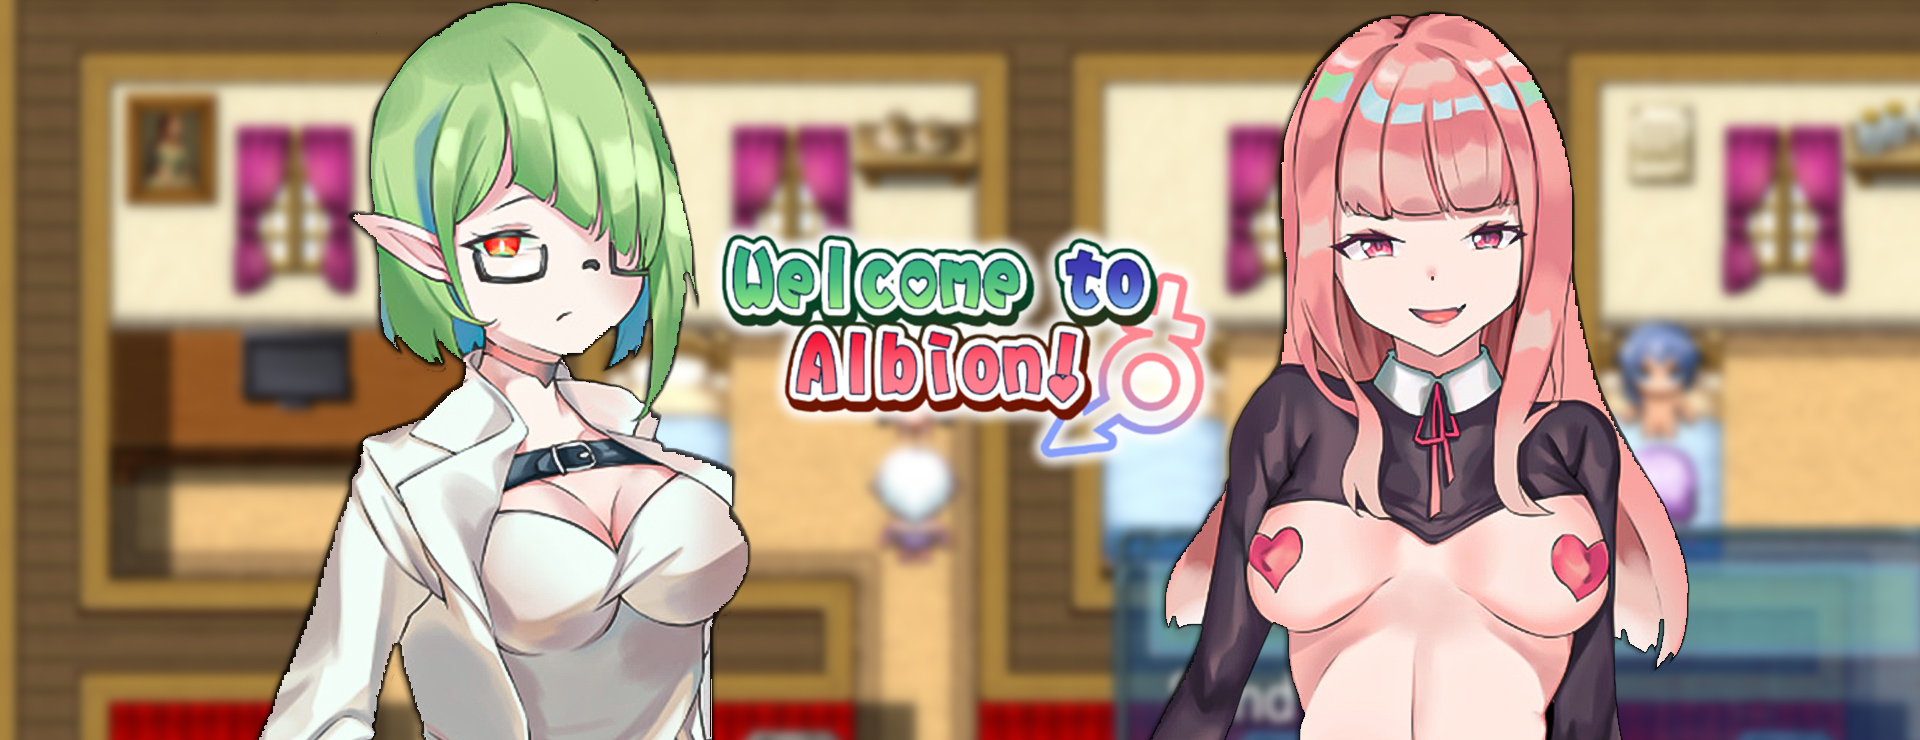 Welcome to Albion! - RPG Gra